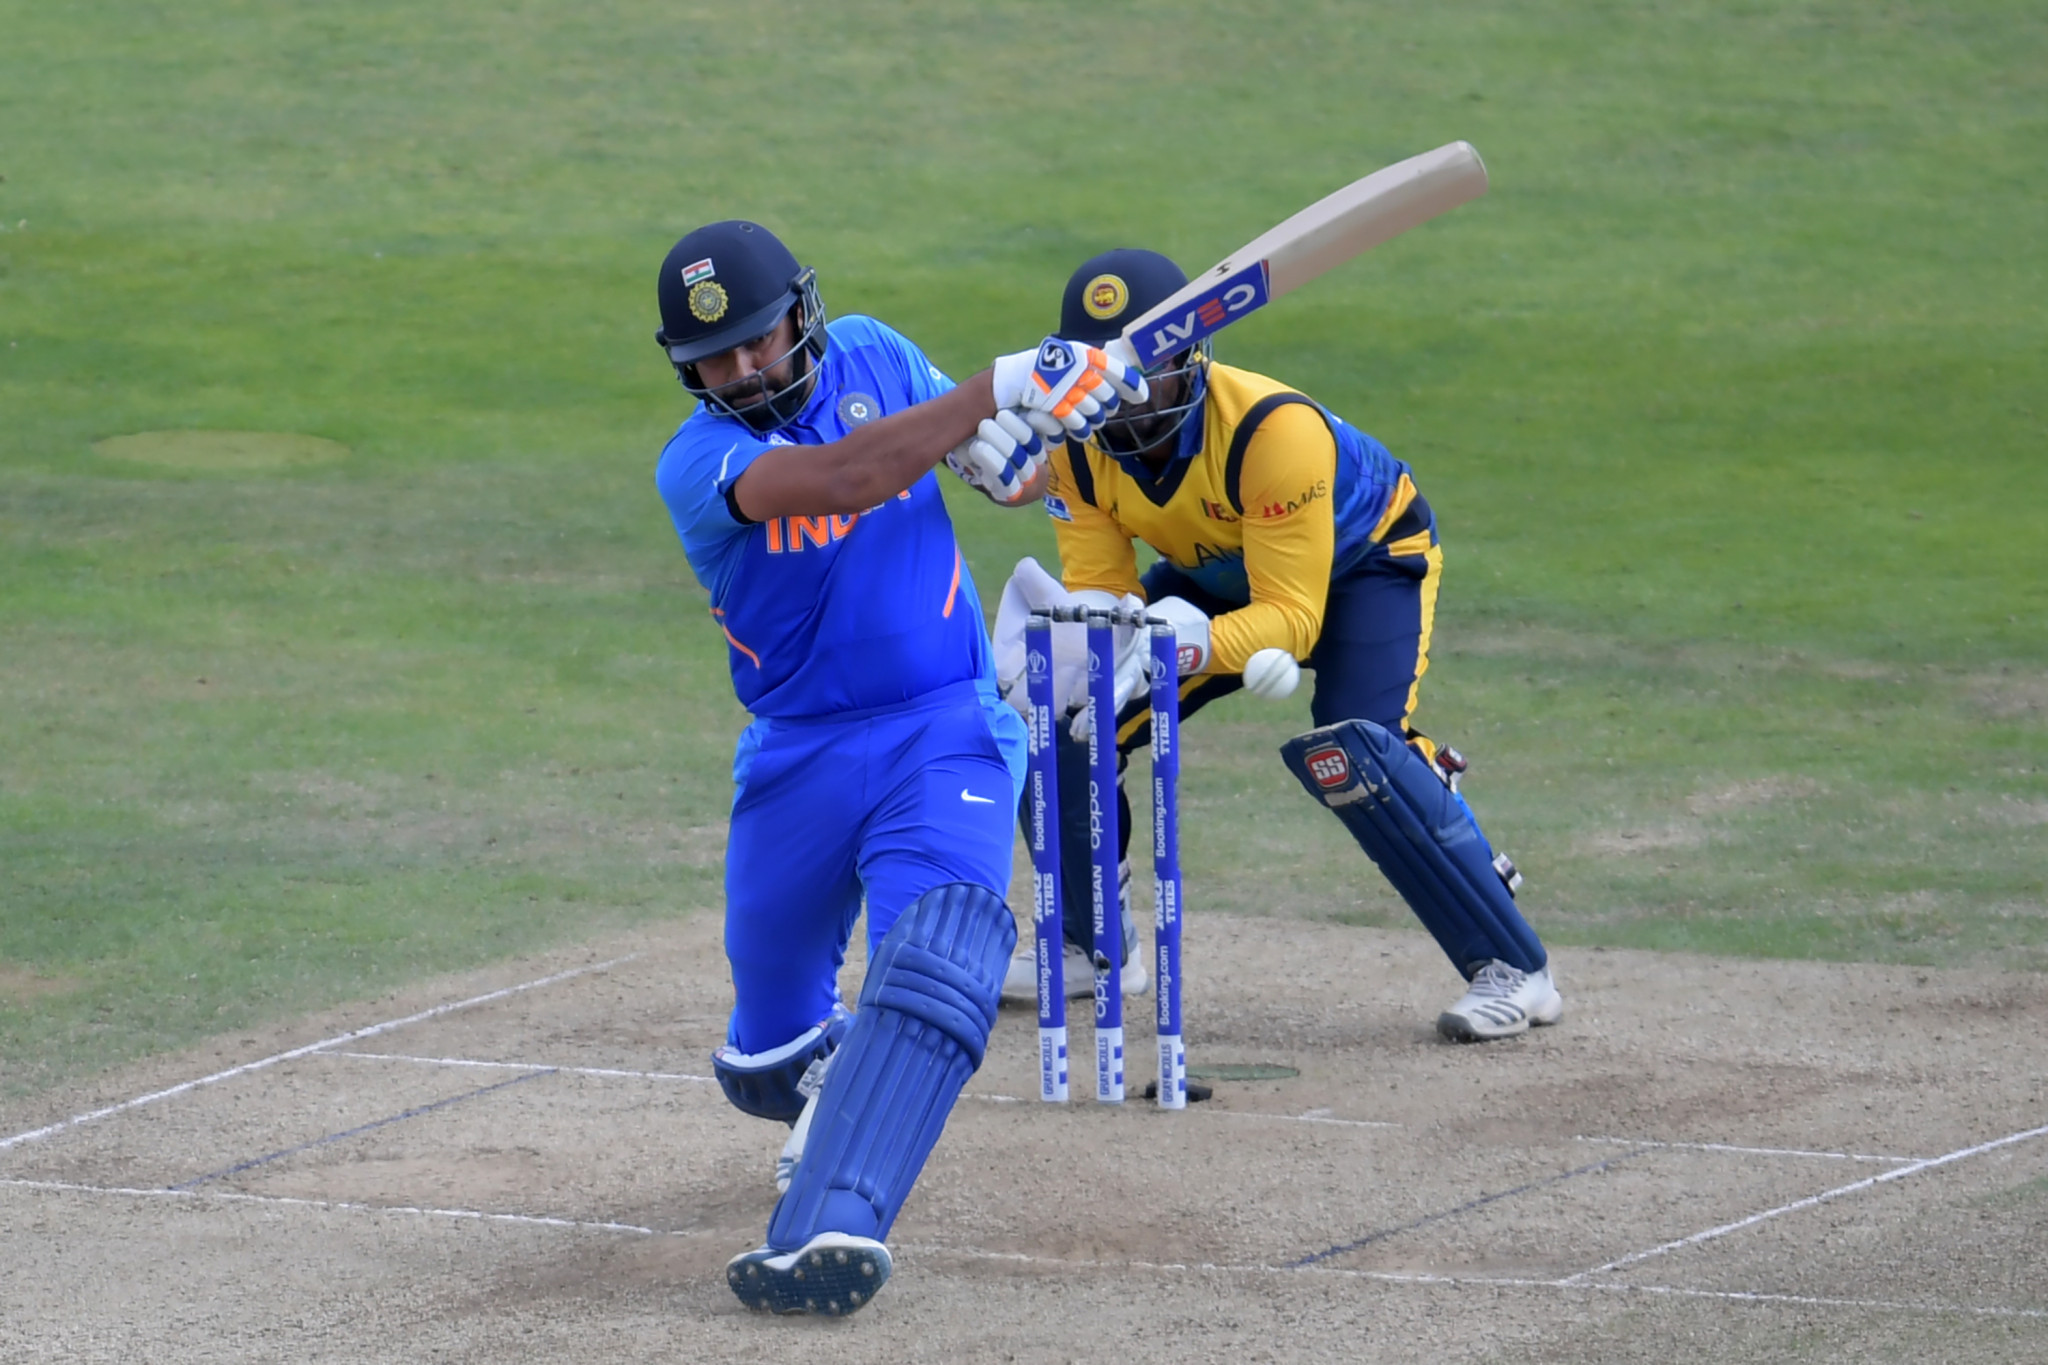 India top group with victory over Sri Lanka at Cricket World Cup